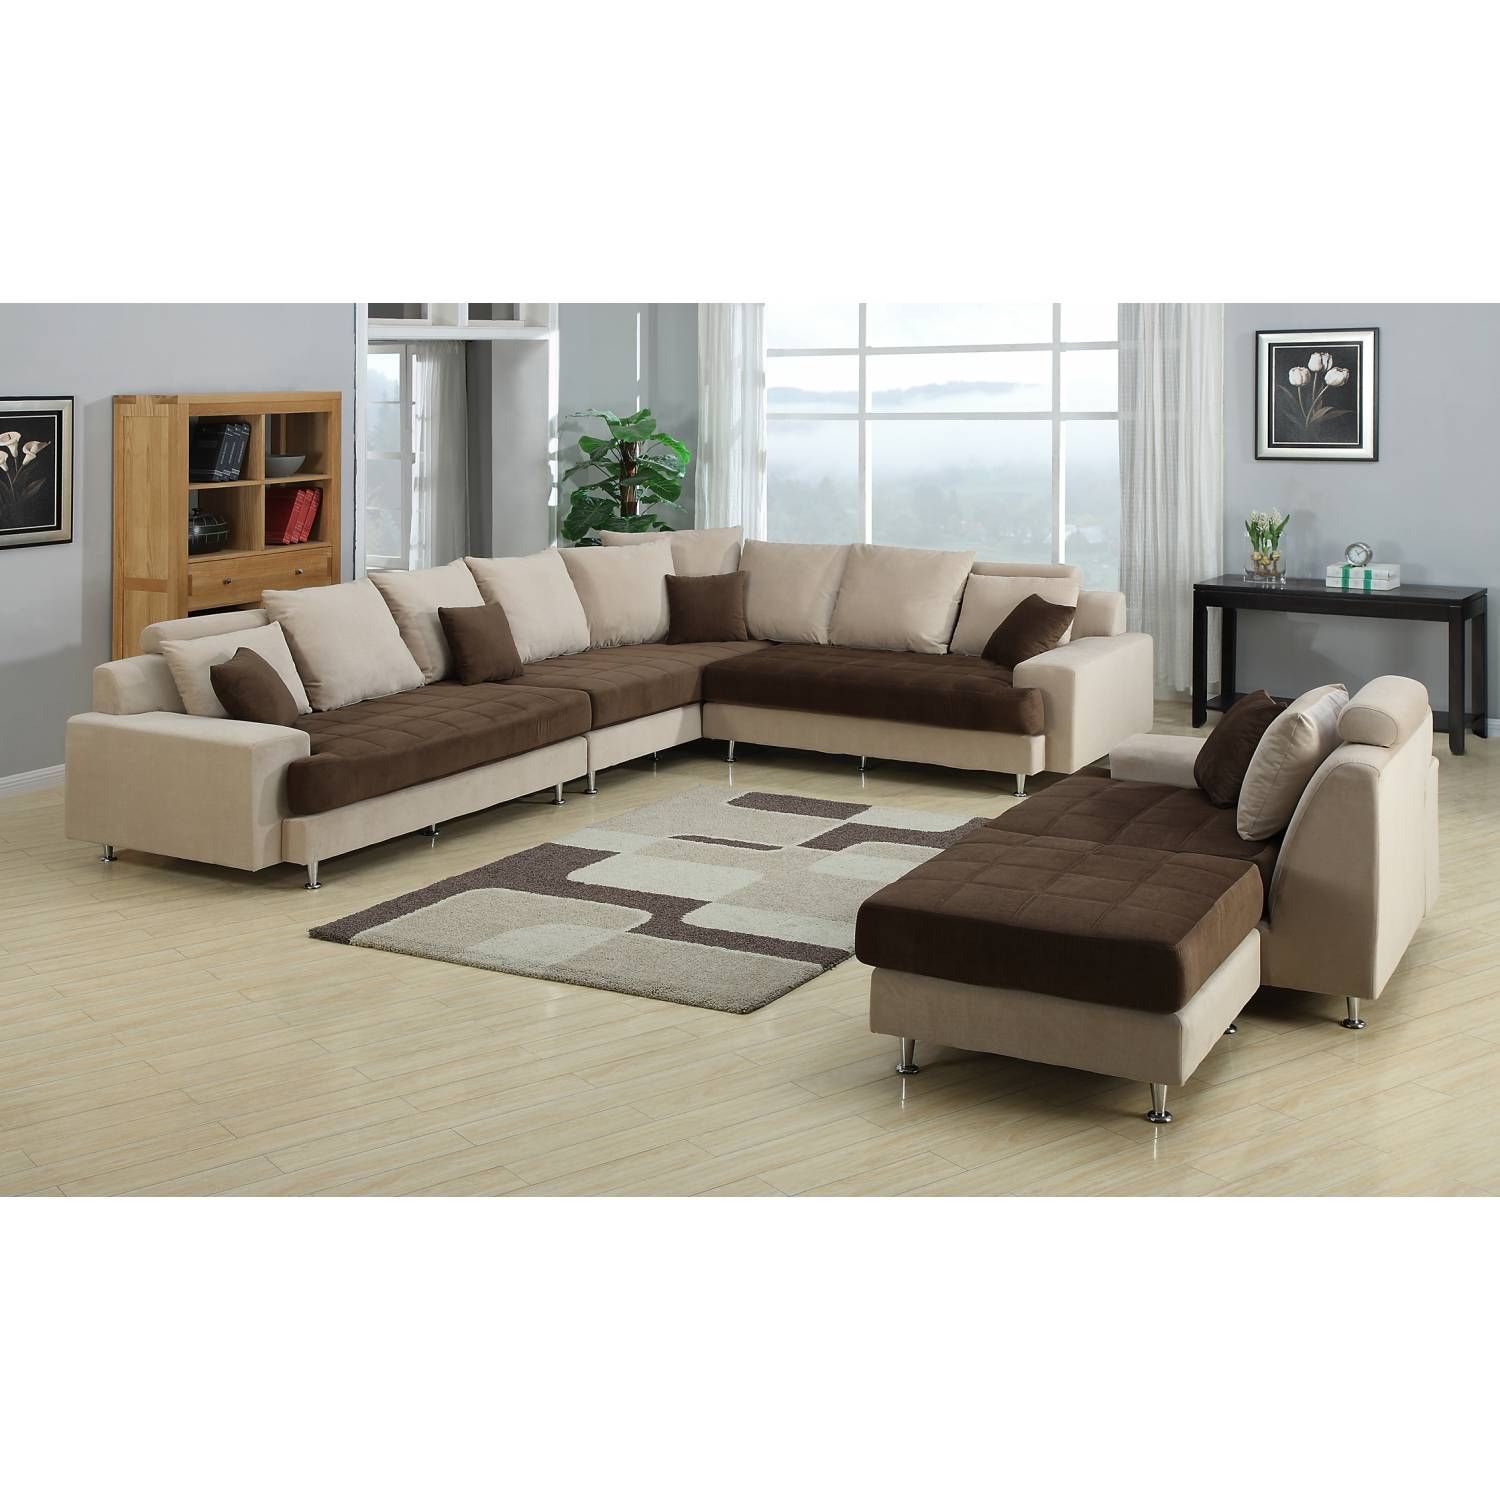 Sectional Sofa With Ottoman – Foter Inside 2 Tone Chocolate Microfiber Sofas (Photo 14 of 15)